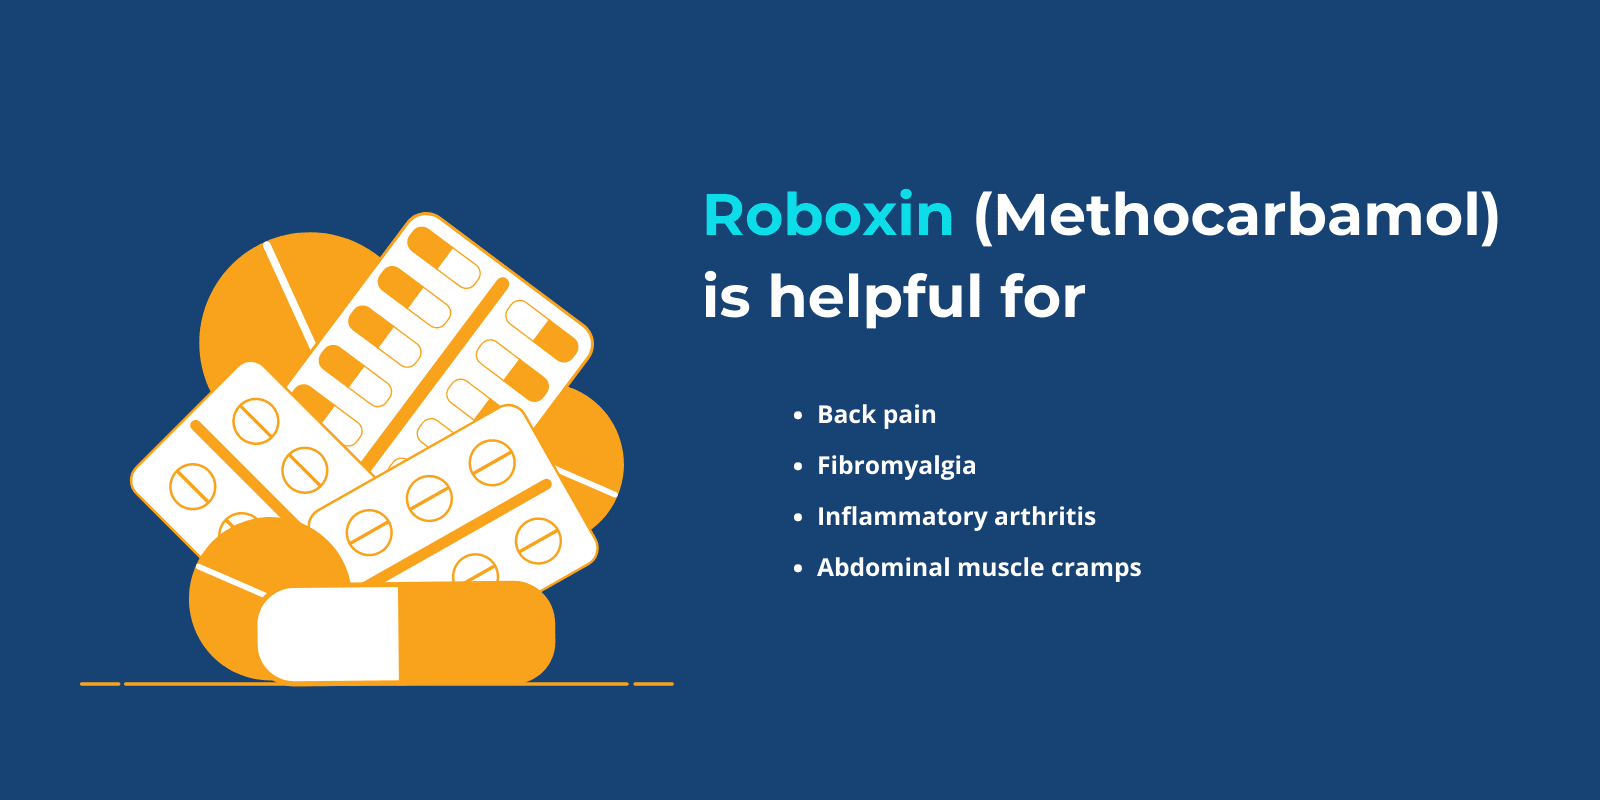 "Robaxin (Methocarbamol) is helpful for" text and a list of Methocarbamol benefits next to a graphic of orange pills